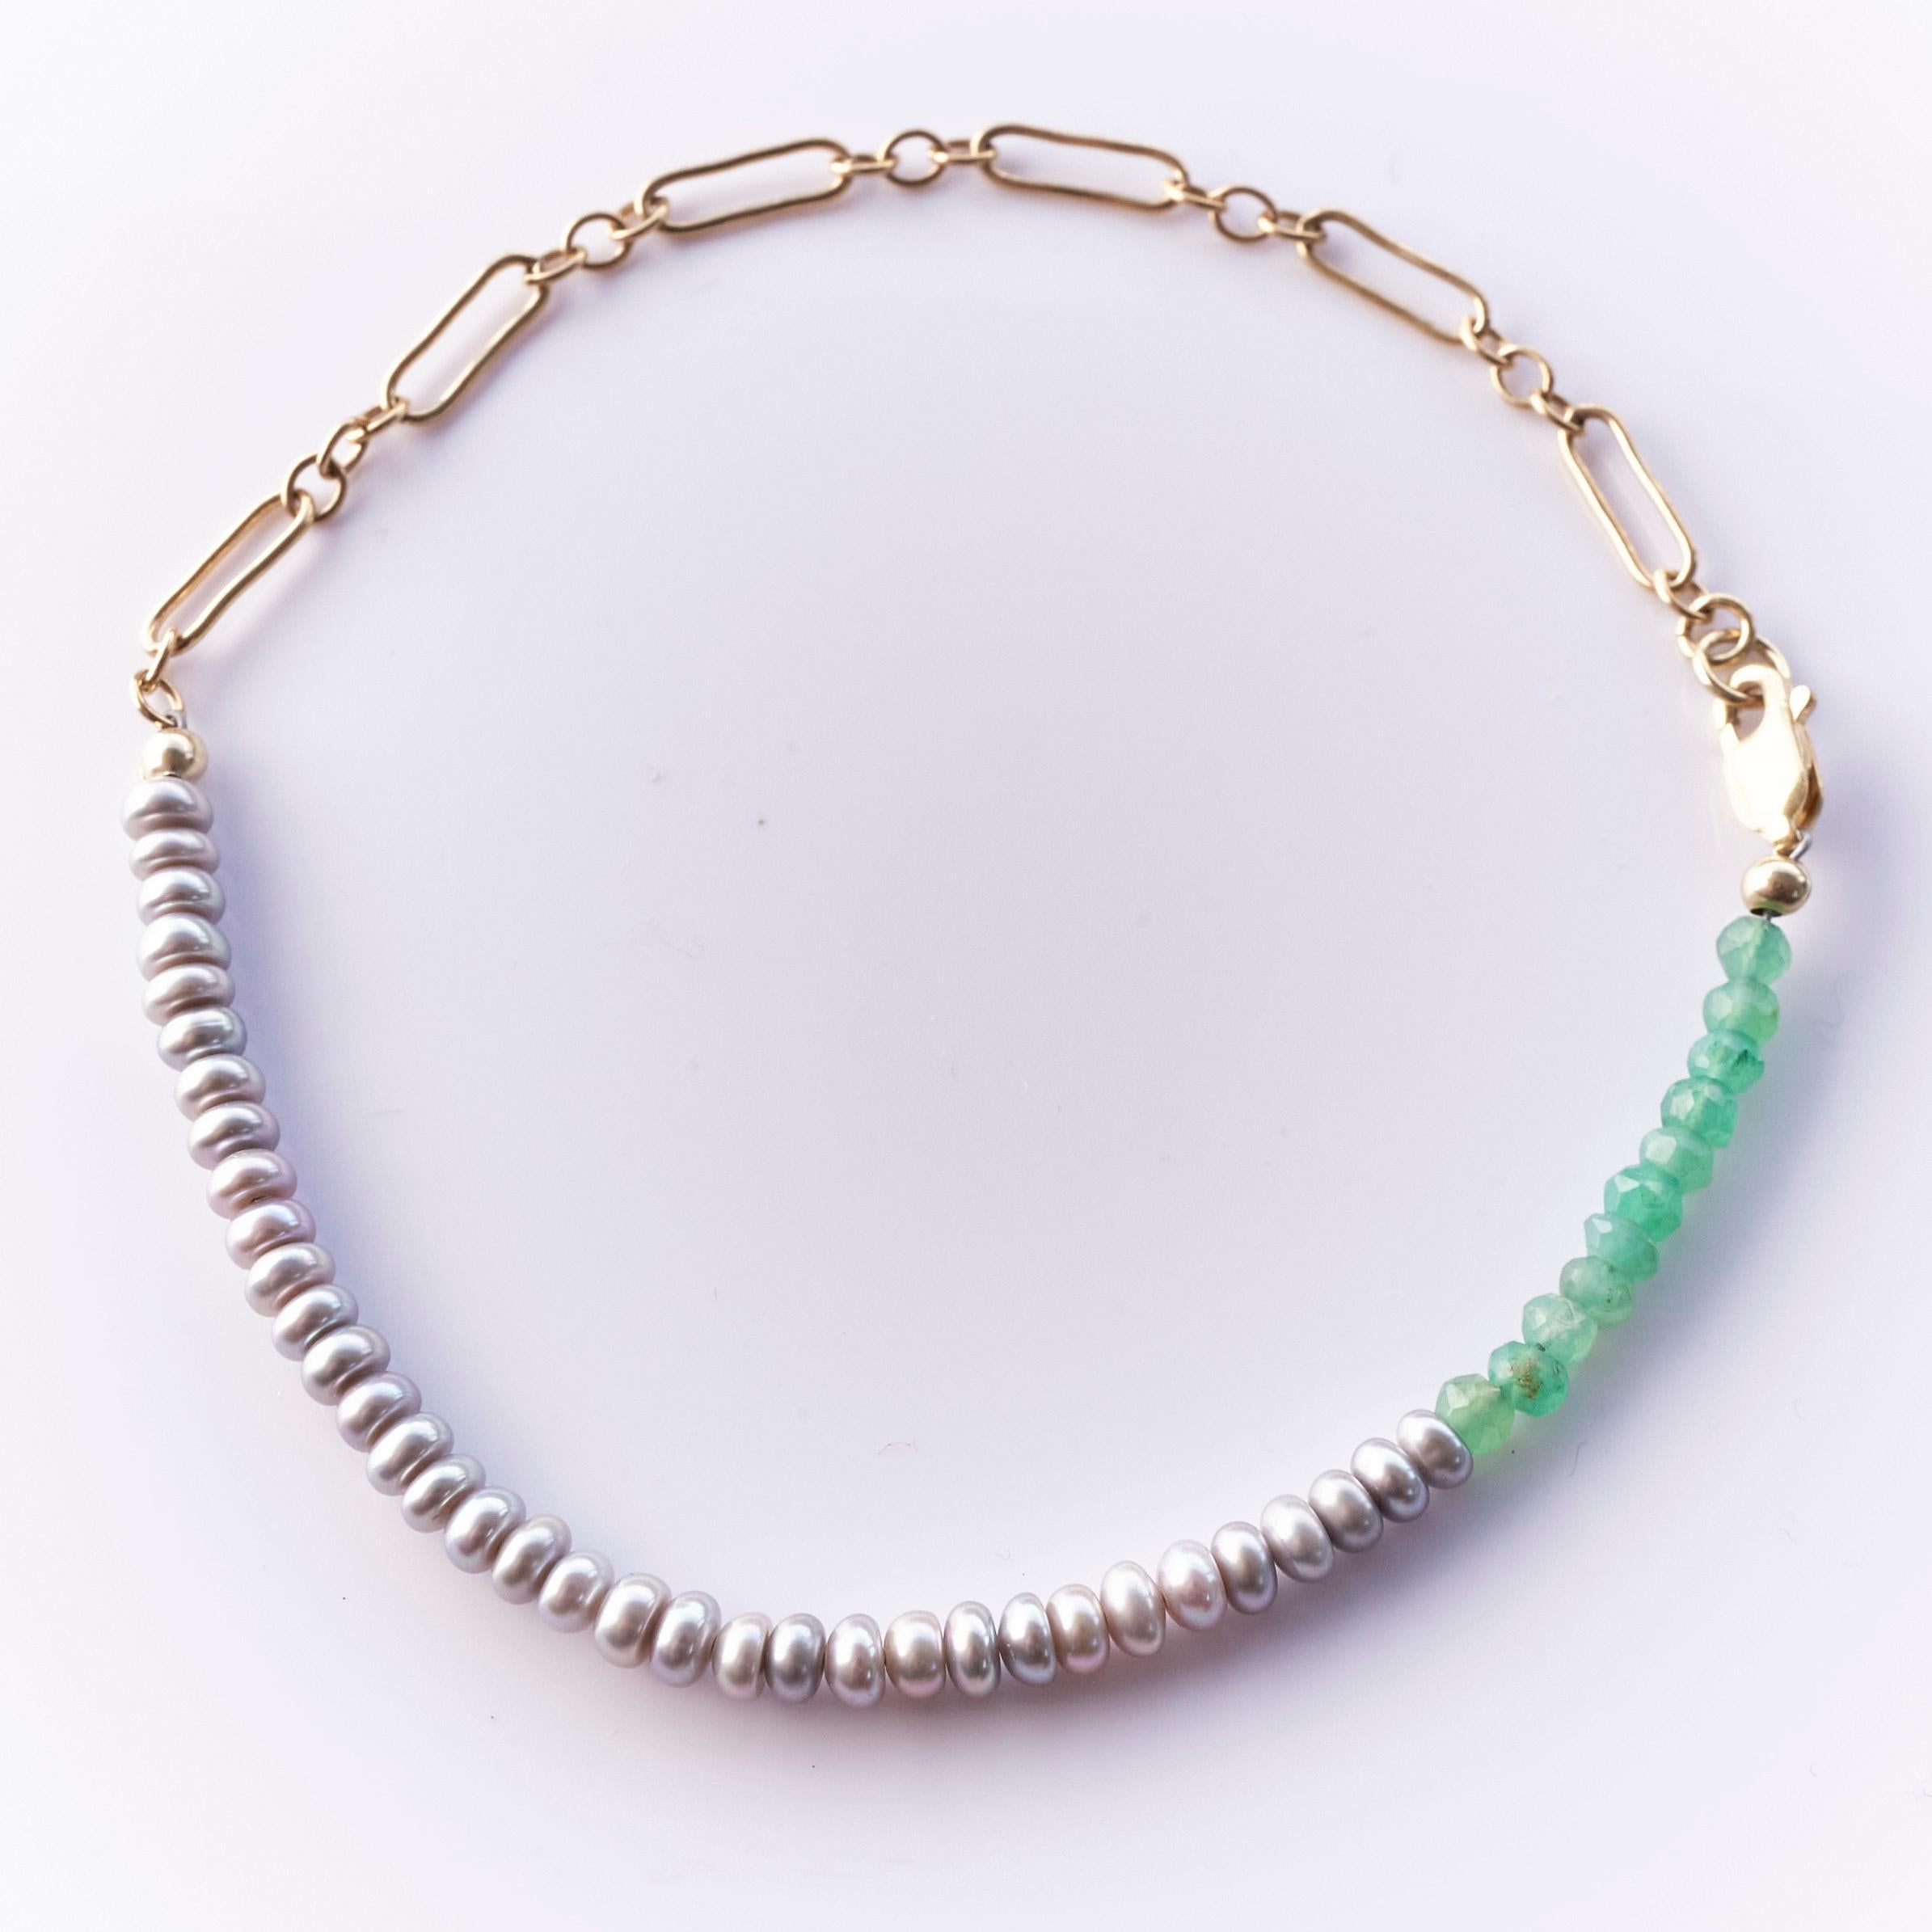 Round Cut Pearl Chrysoprase Bead Bracelet Gold Filled Chain J Dauphin For Sale